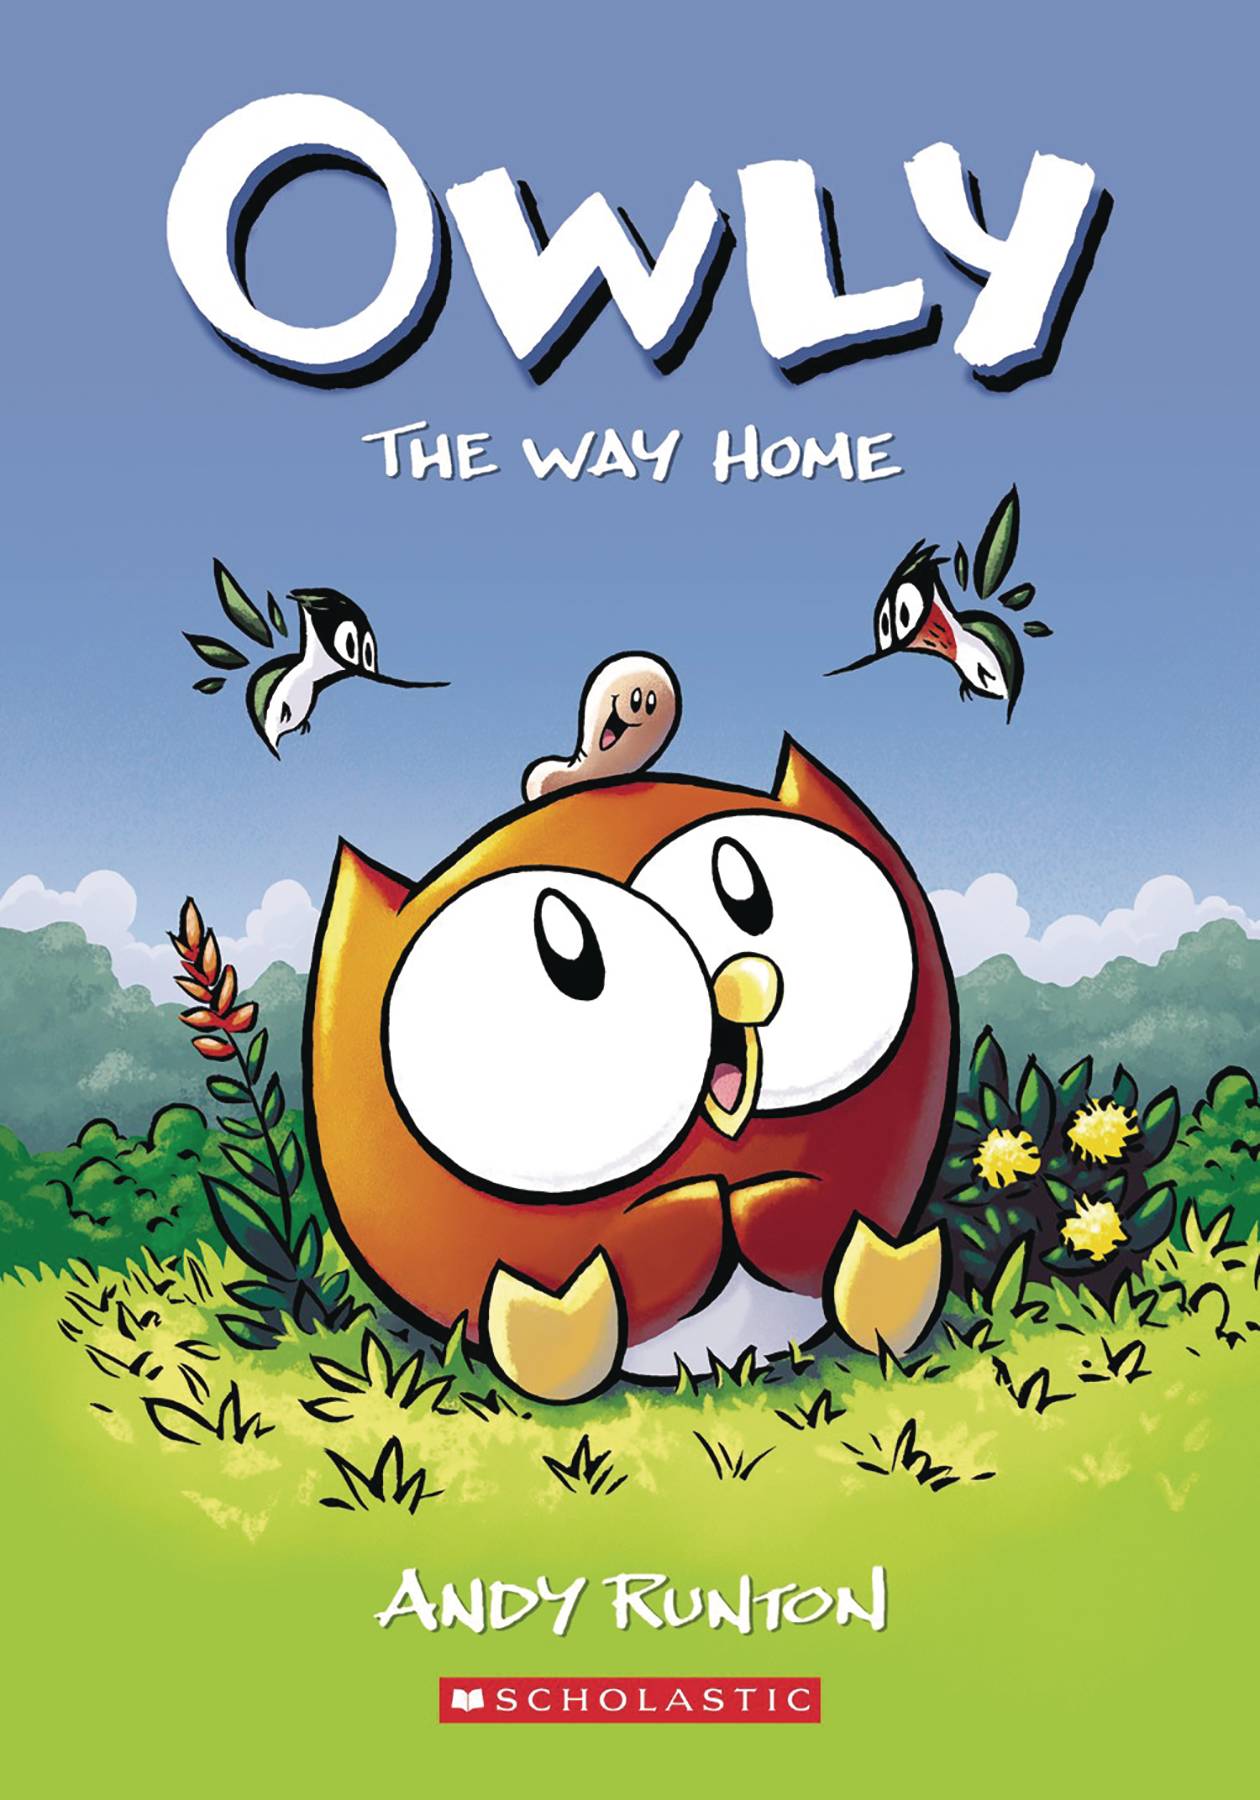 Owly Color Edition Graphic Novel Volume 1 Way Home